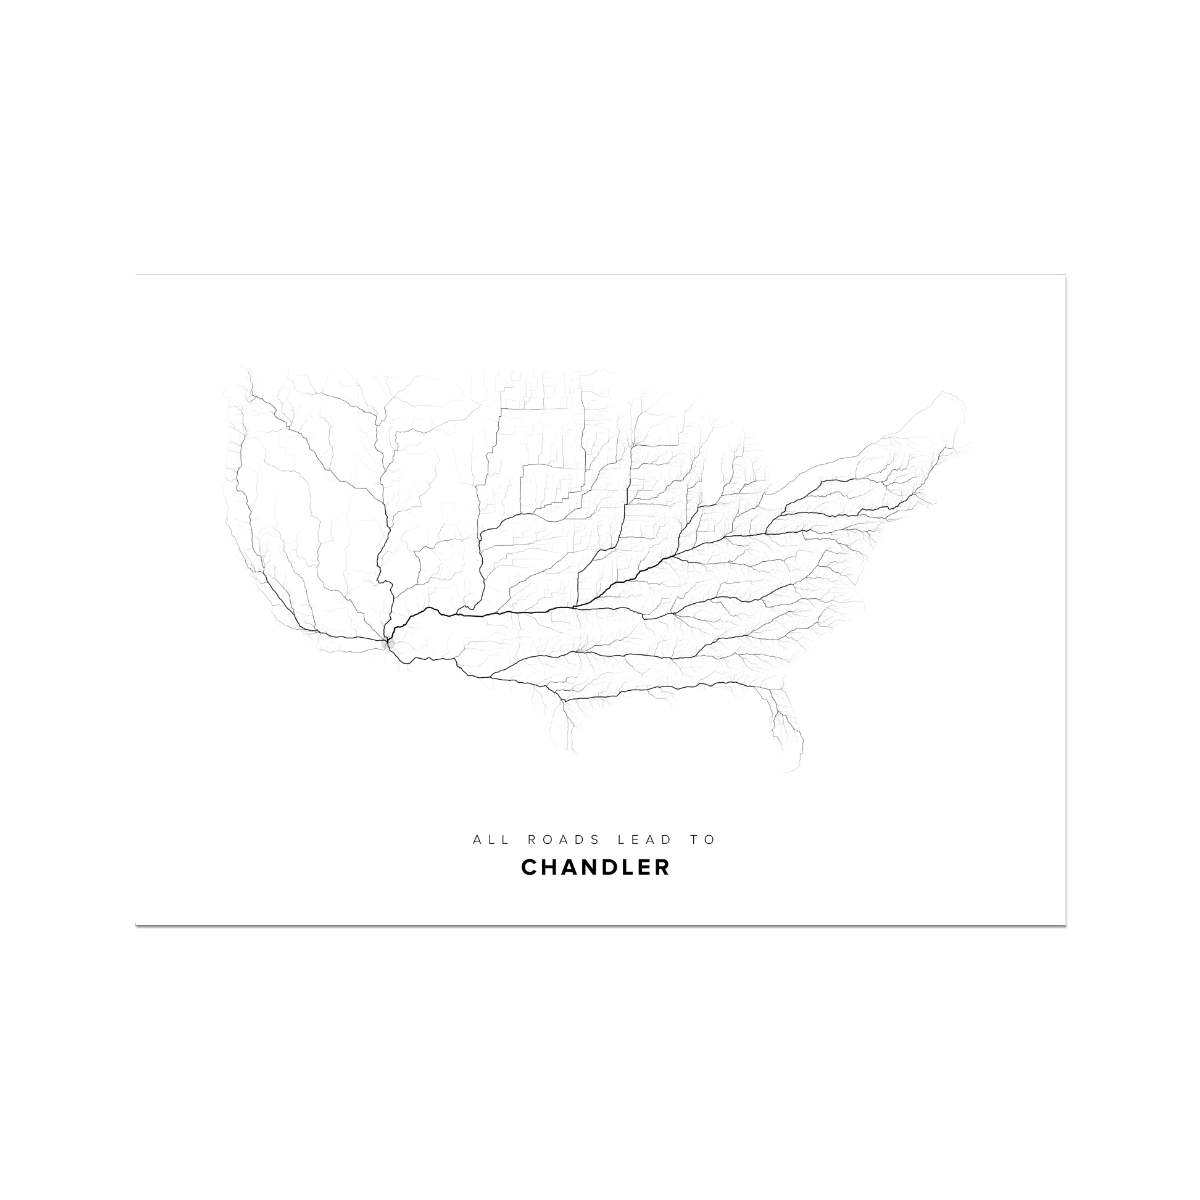 All roads lead to Chandler (United States of America) Fine Art Map Print